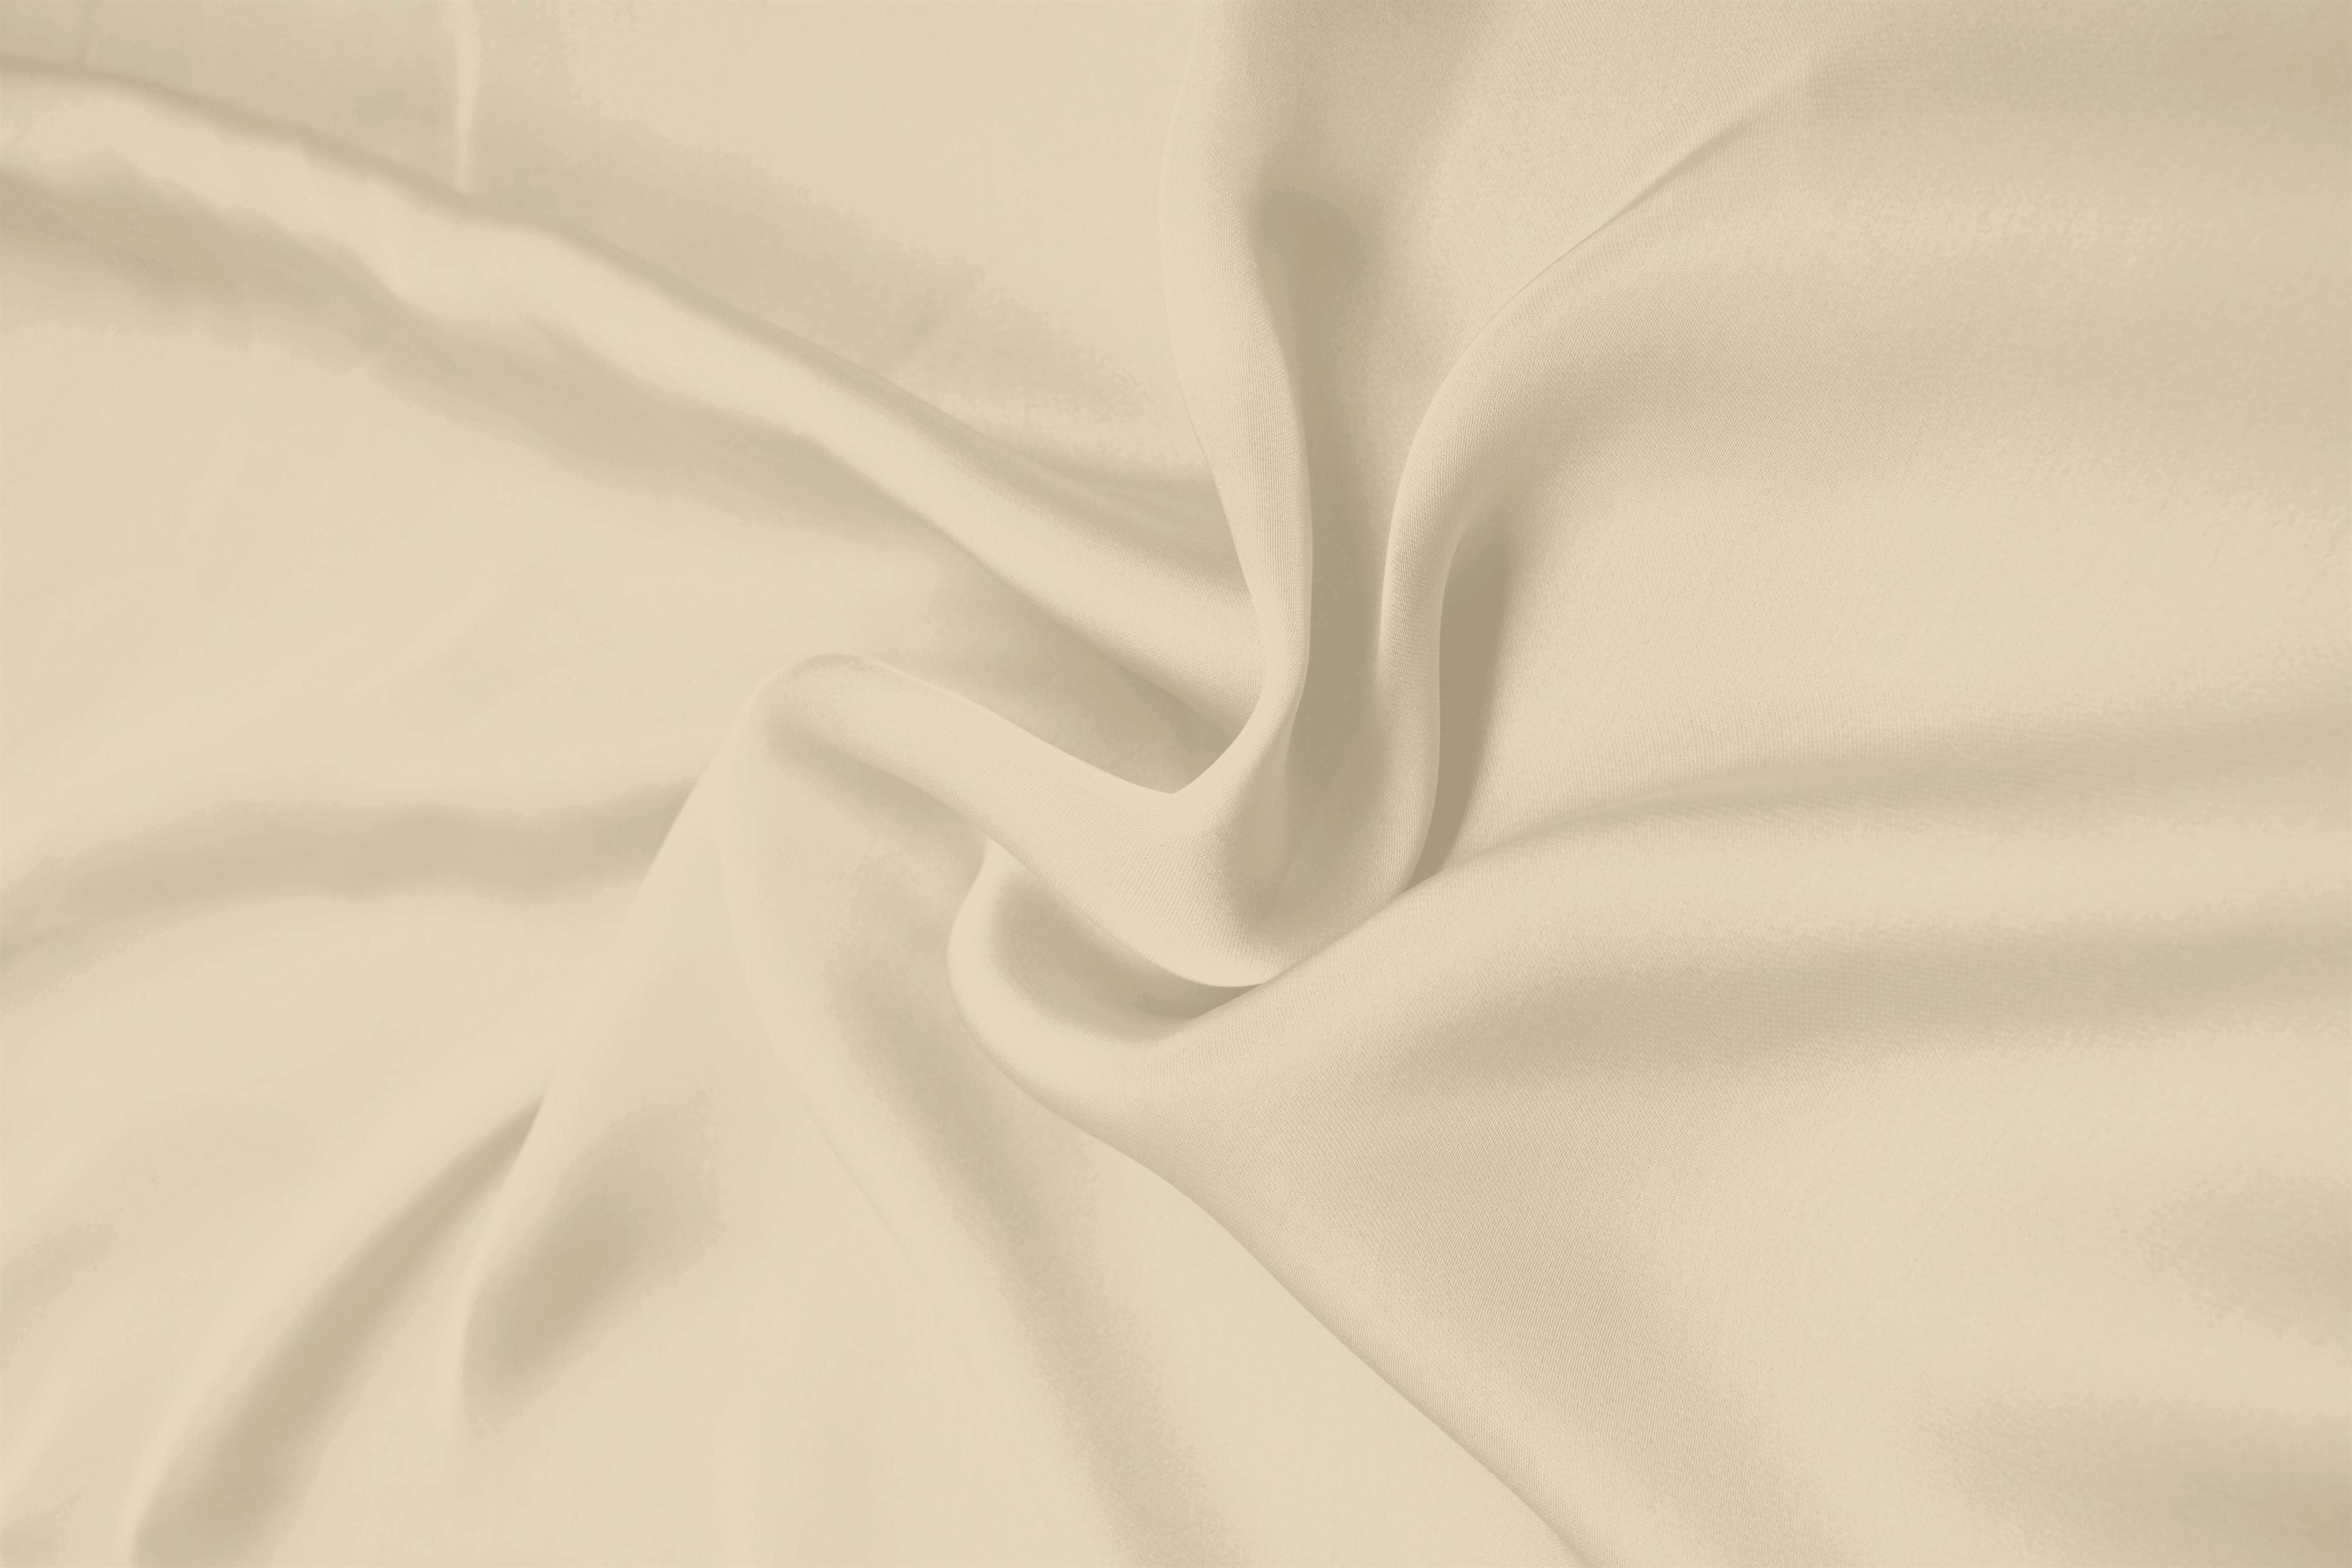 Off-White Plain Dyed Satin Georgette Fabric